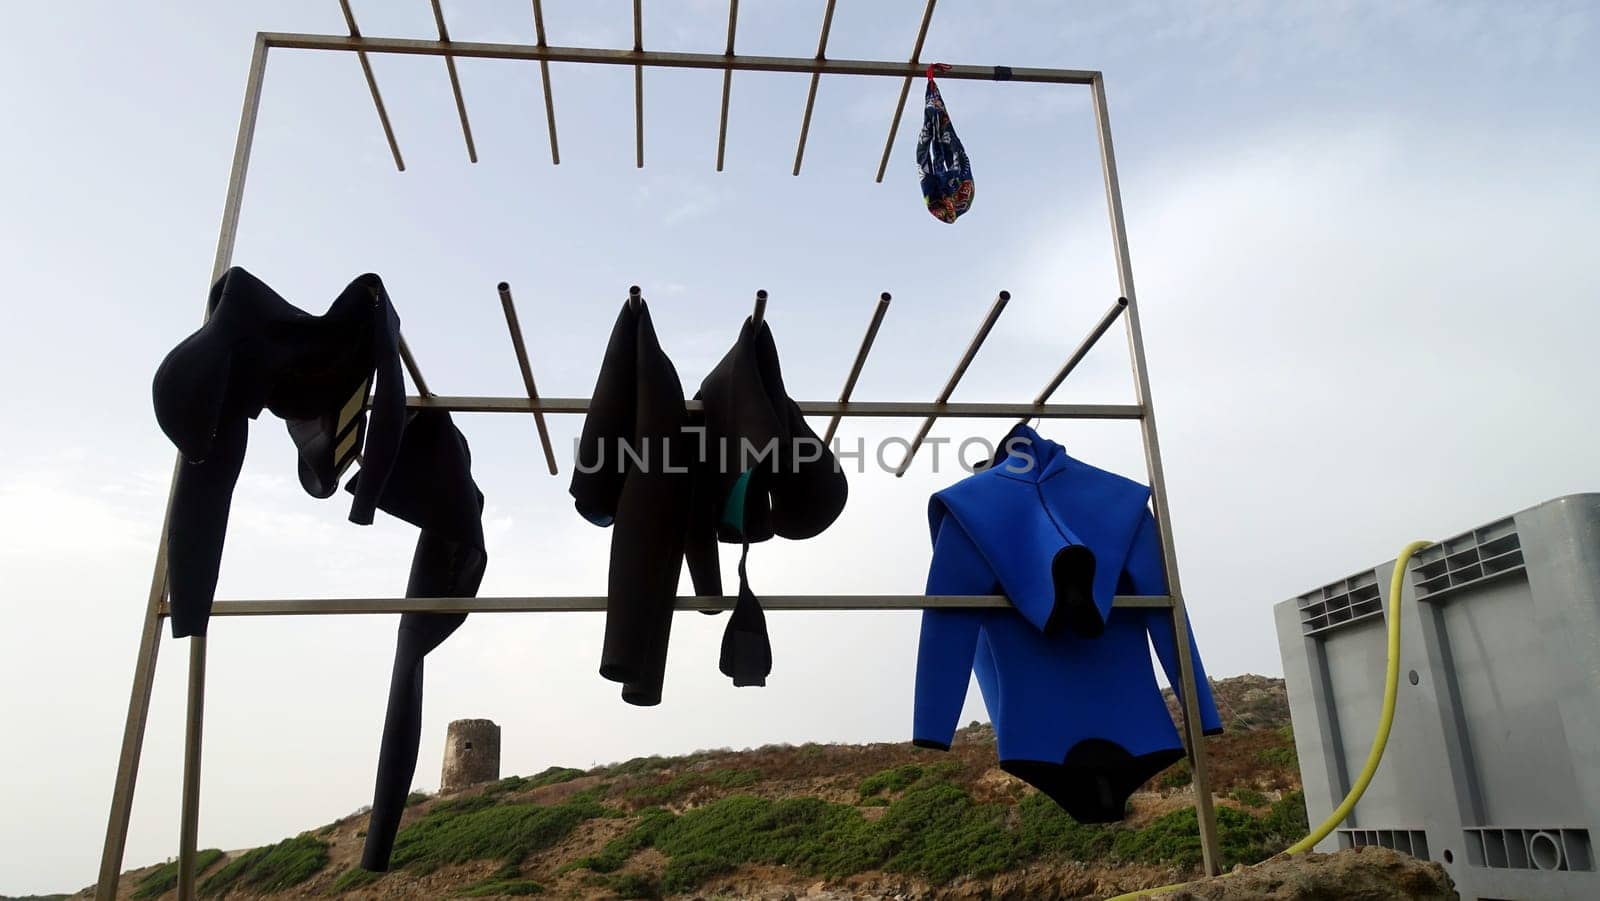 Diving suits and a swimsuit hanging out to dry in the sun after an intense day in the water.